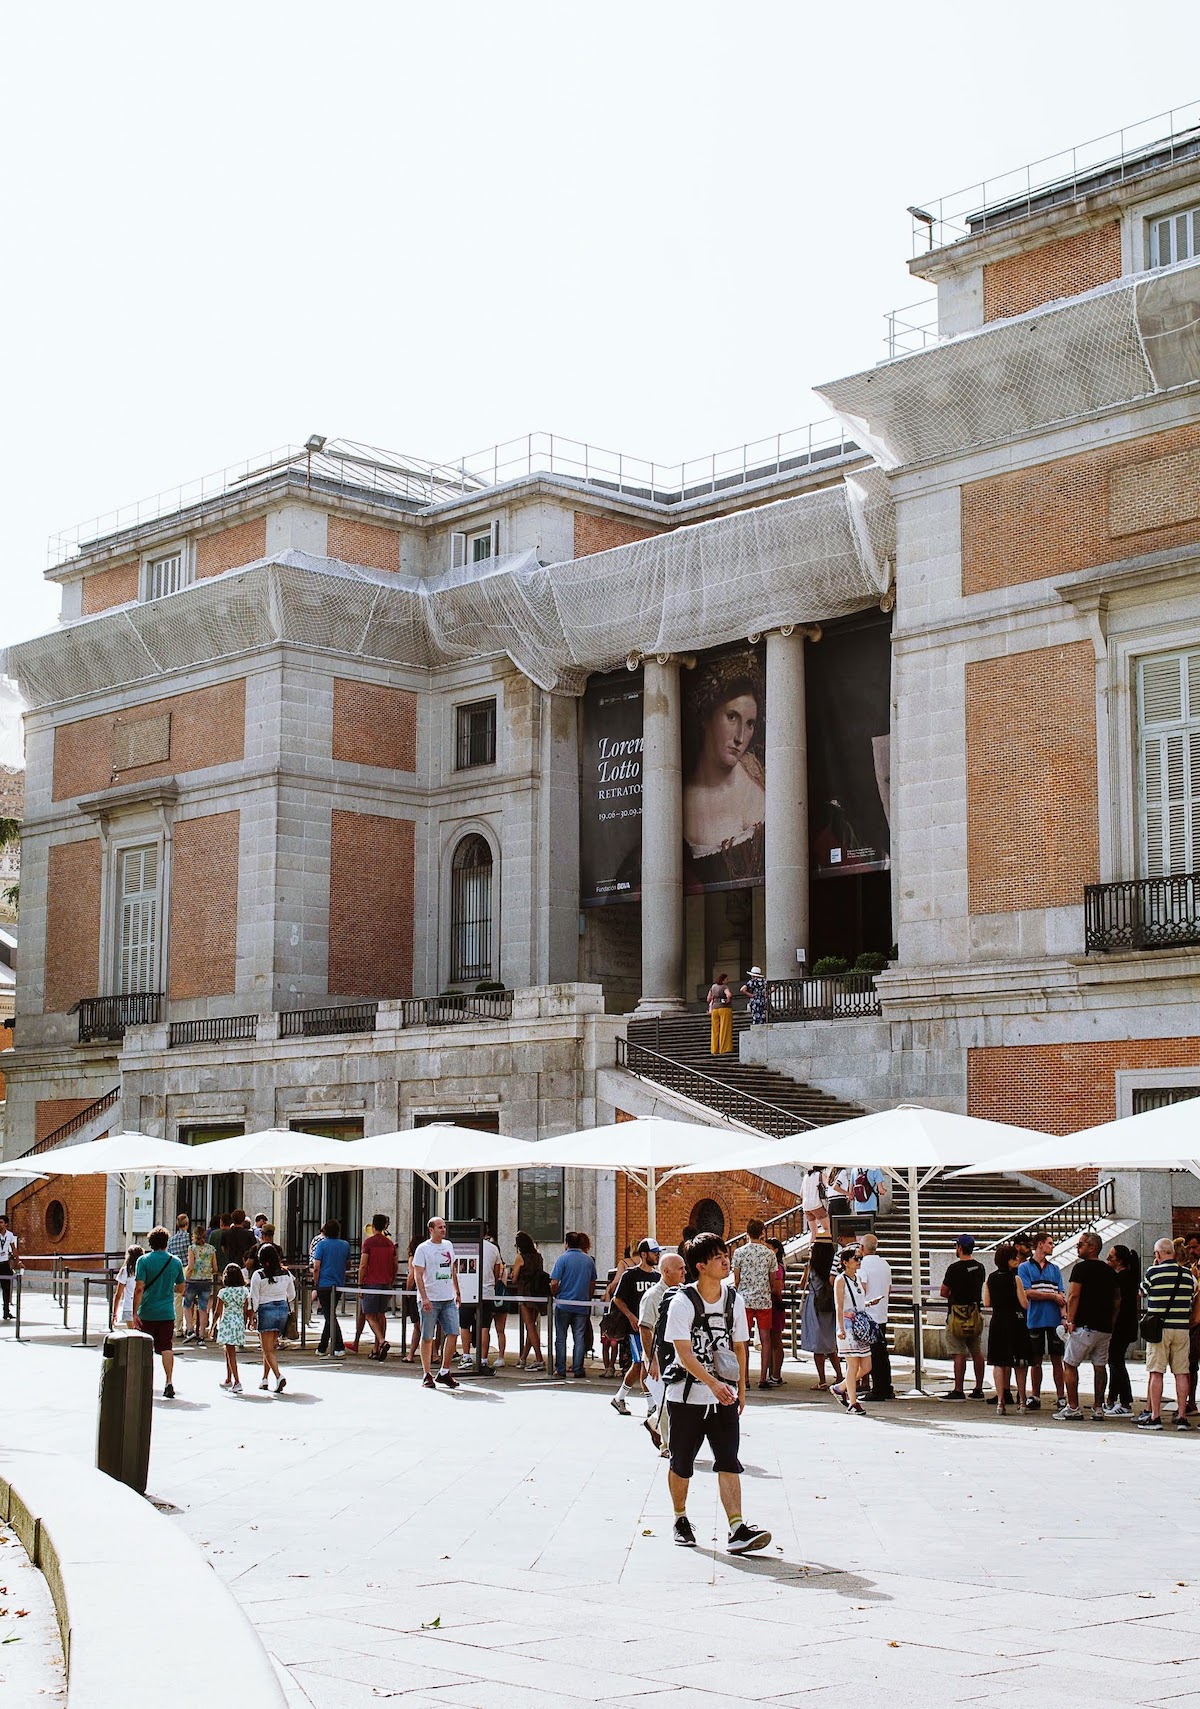 When it comes to free museums in Madrid, you can't beat the Prado, which offers free entry for two hours every afternoon.